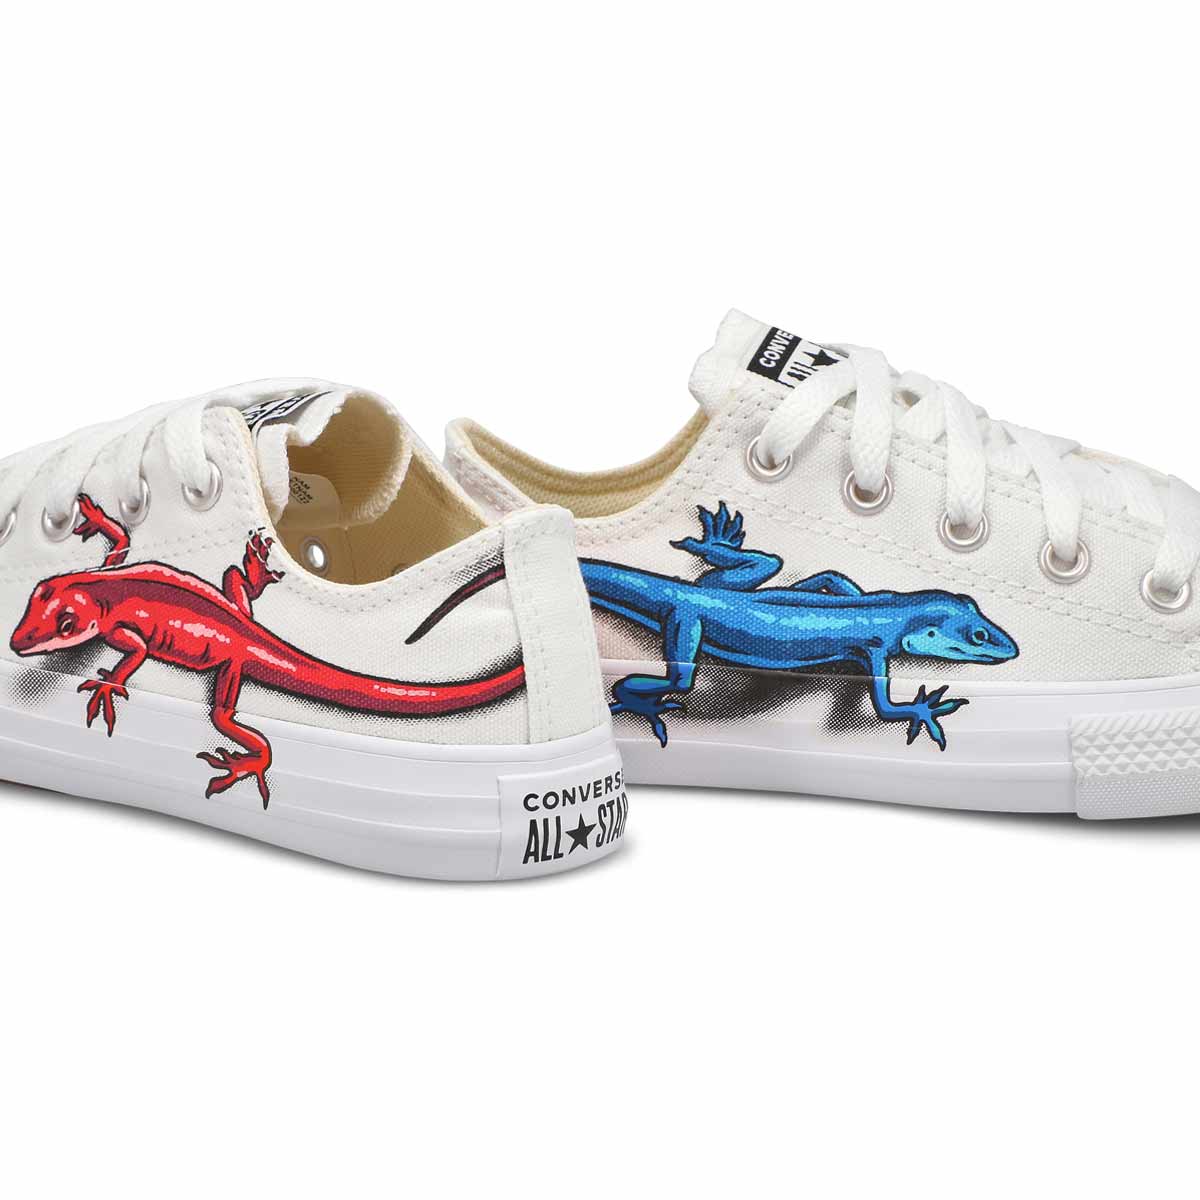 Boys' CT All Star Ox sneakers - wht/red/blk